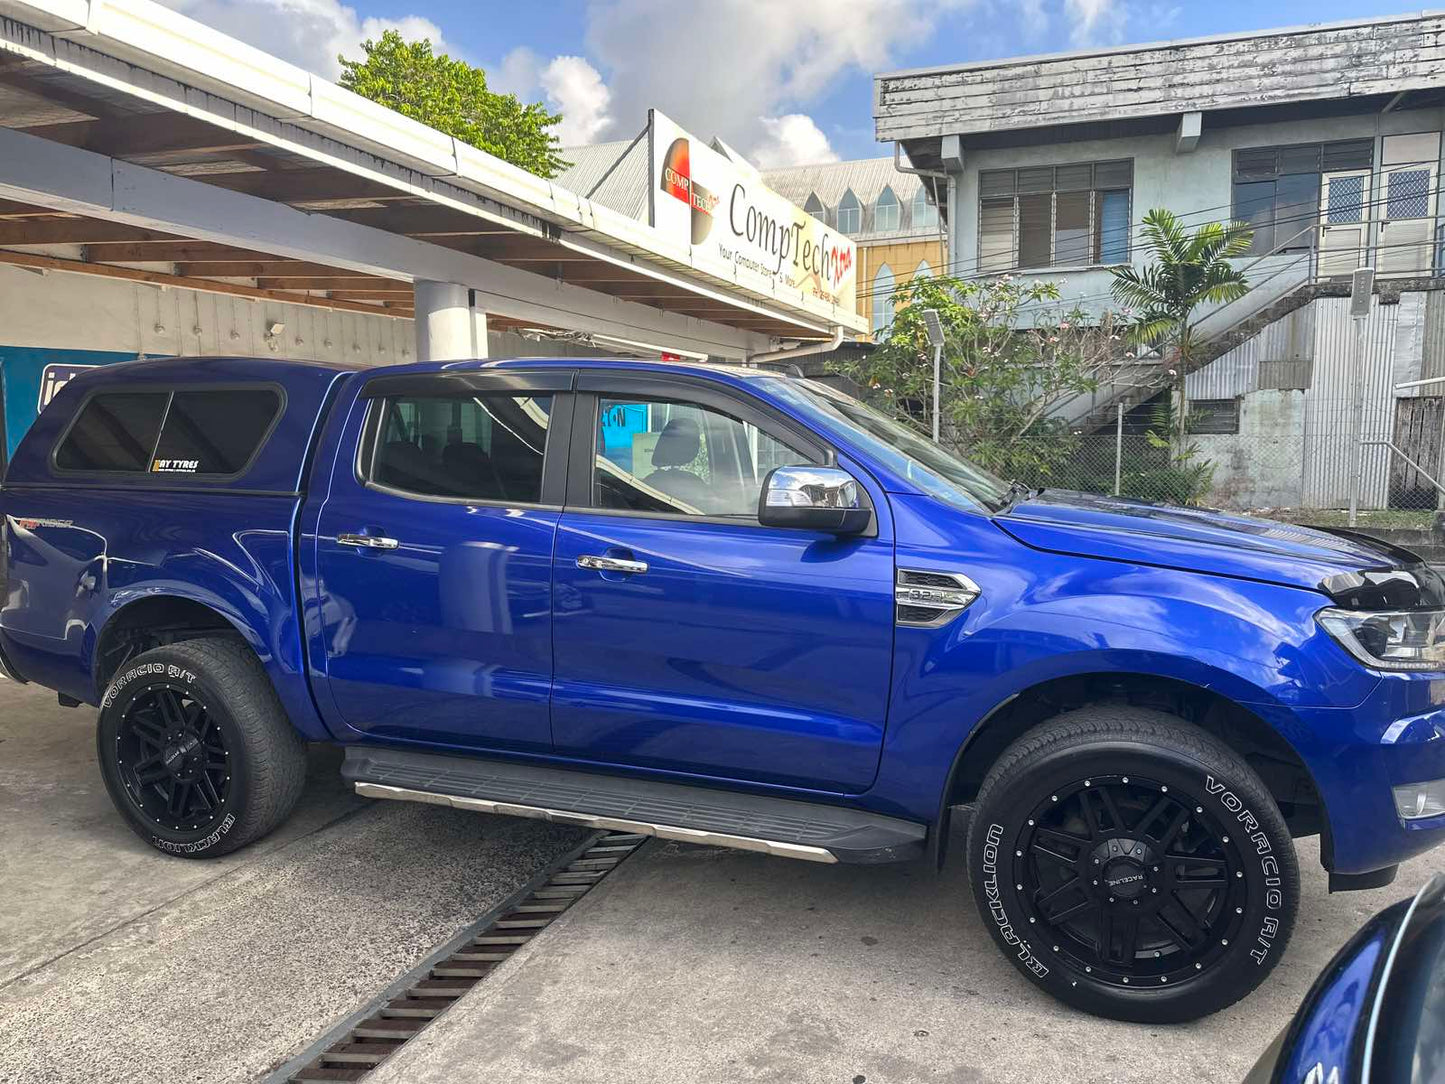 Ford Ranger 4x4 Blue with Back Cap